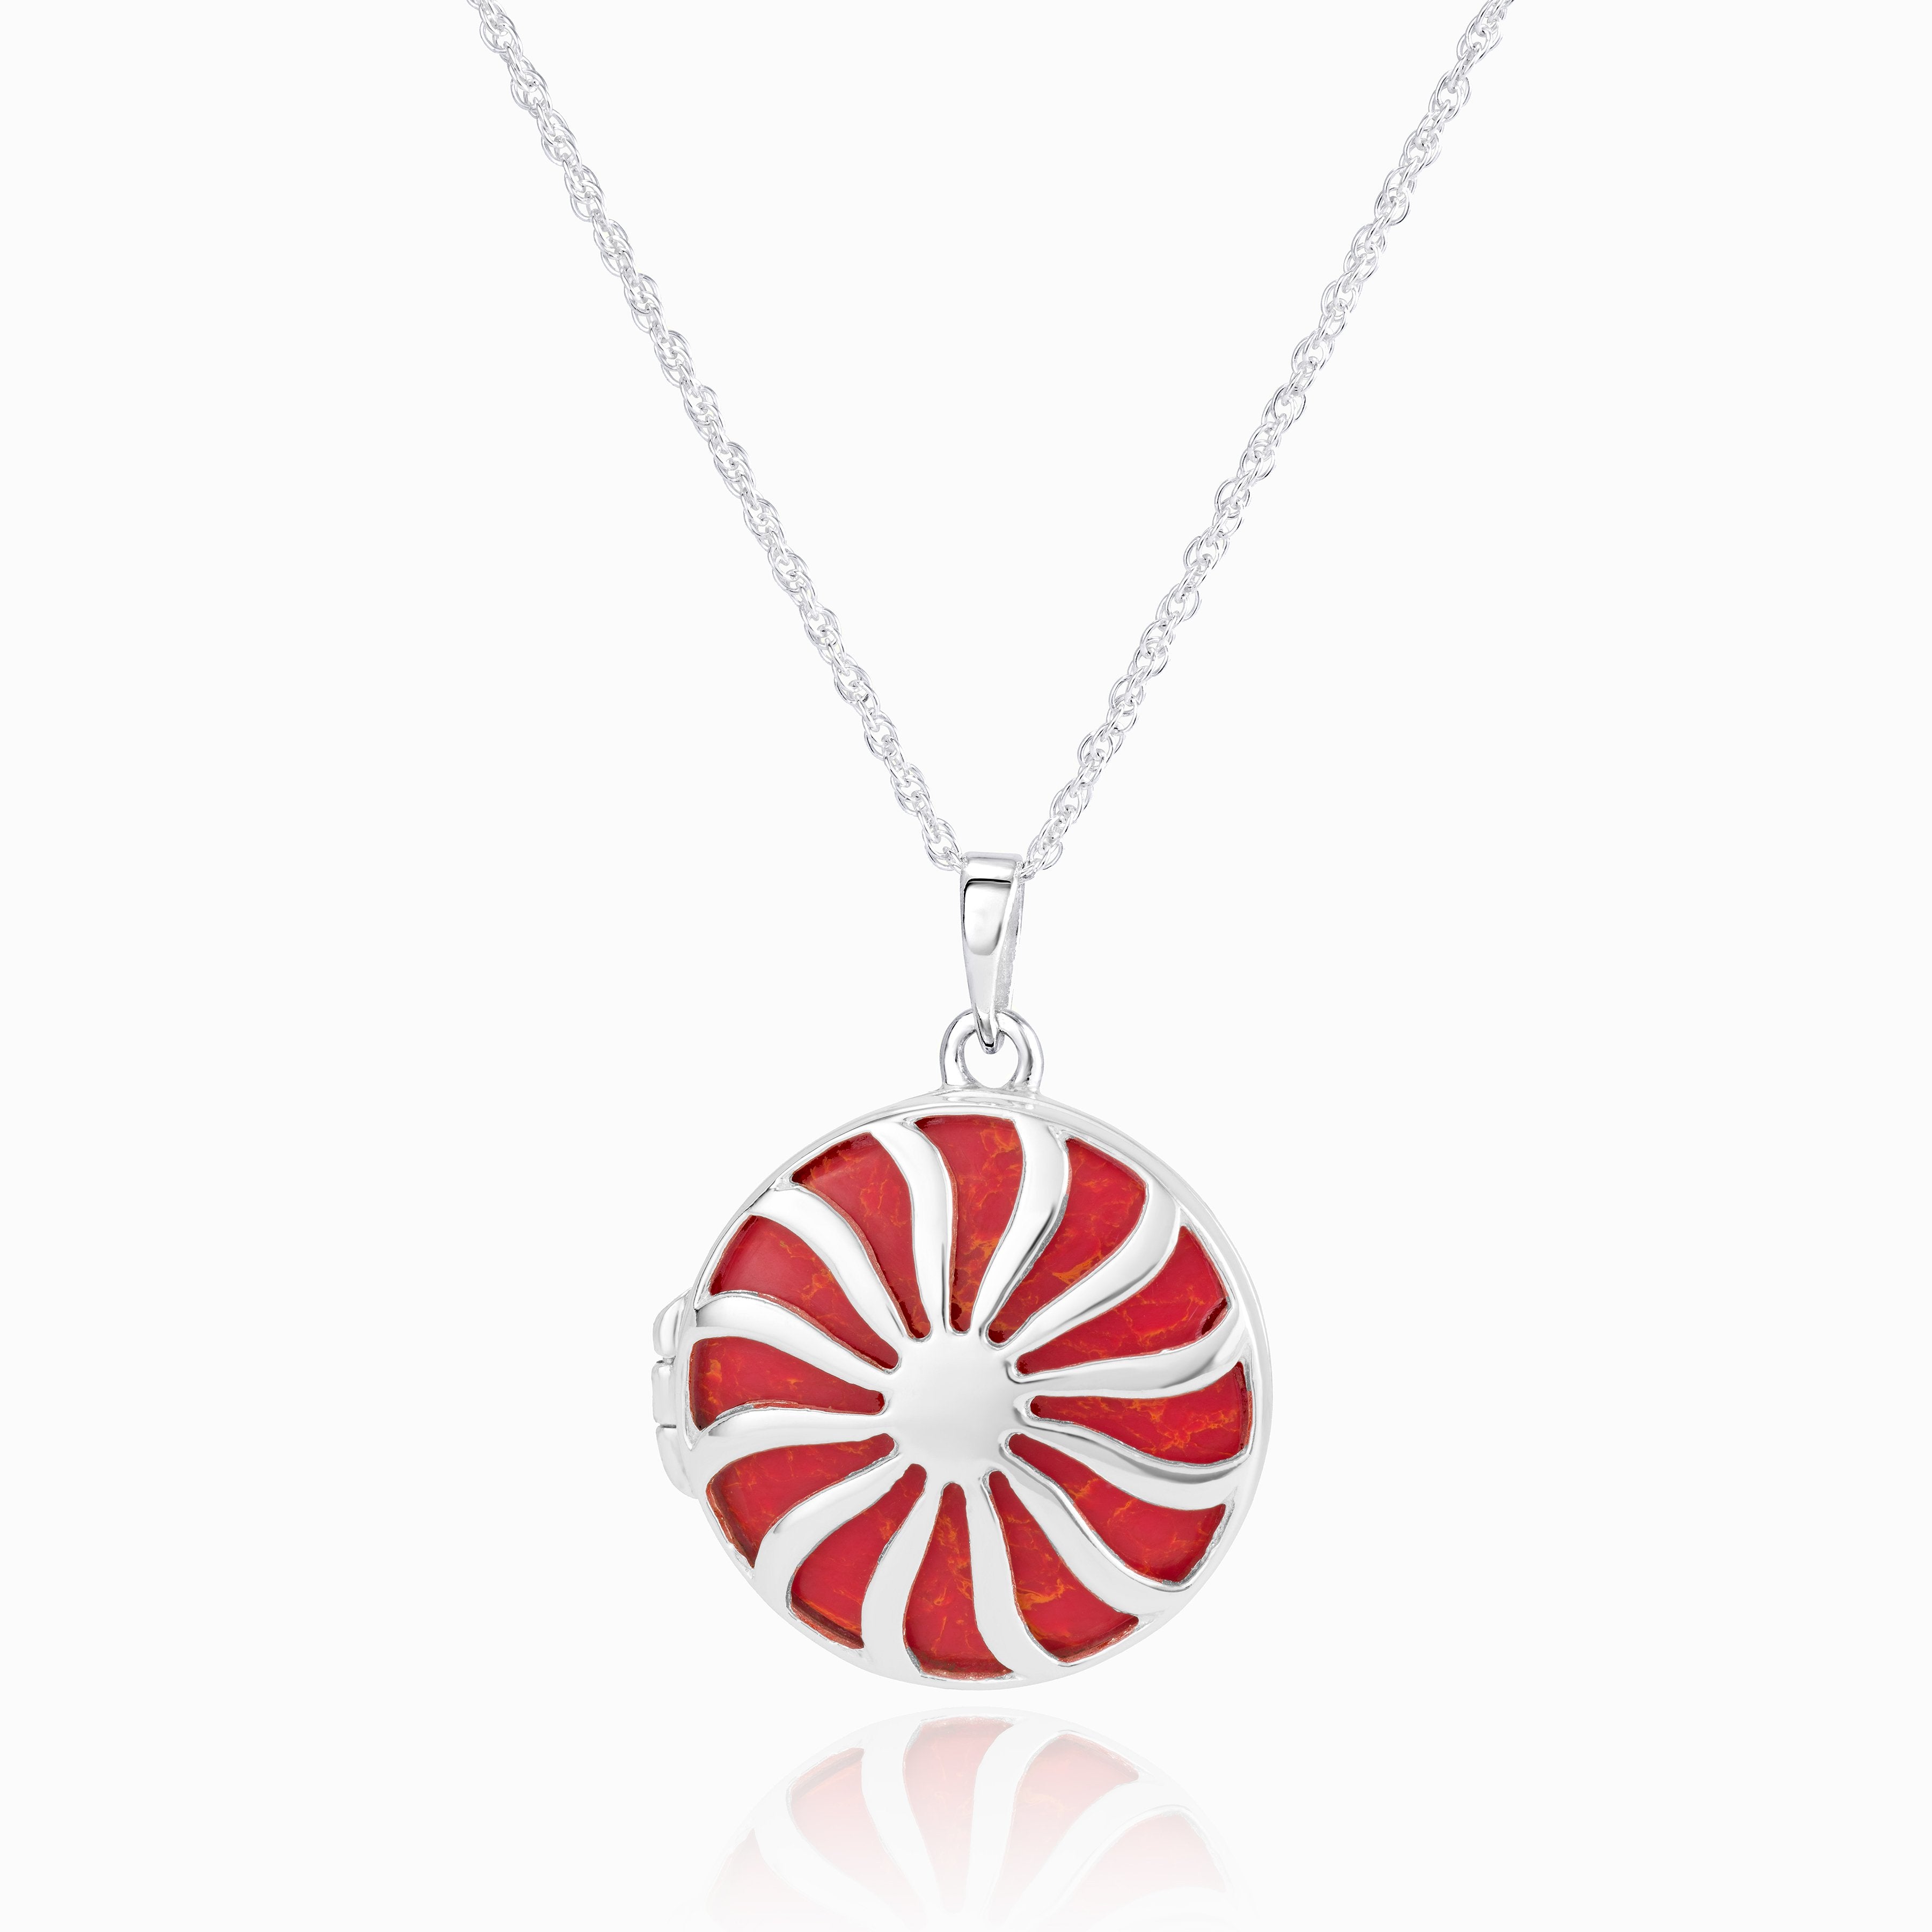 Product title: Large Coral Sun Locket, product type: Locket